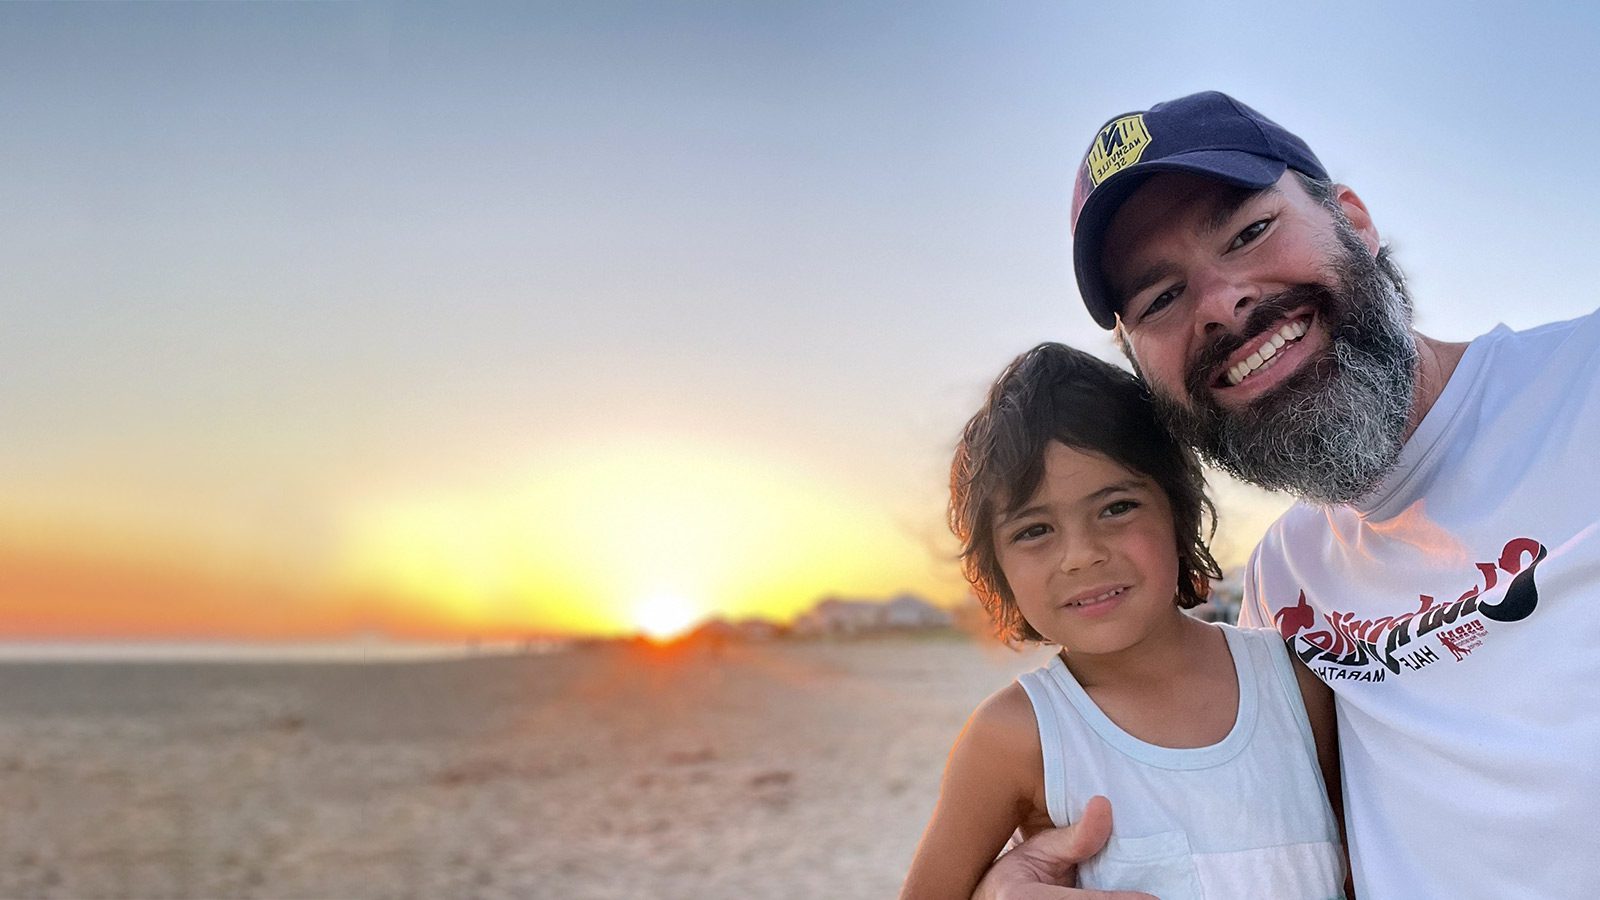 Adoptive dad and son adopted from Colombia at sunset on the beach.